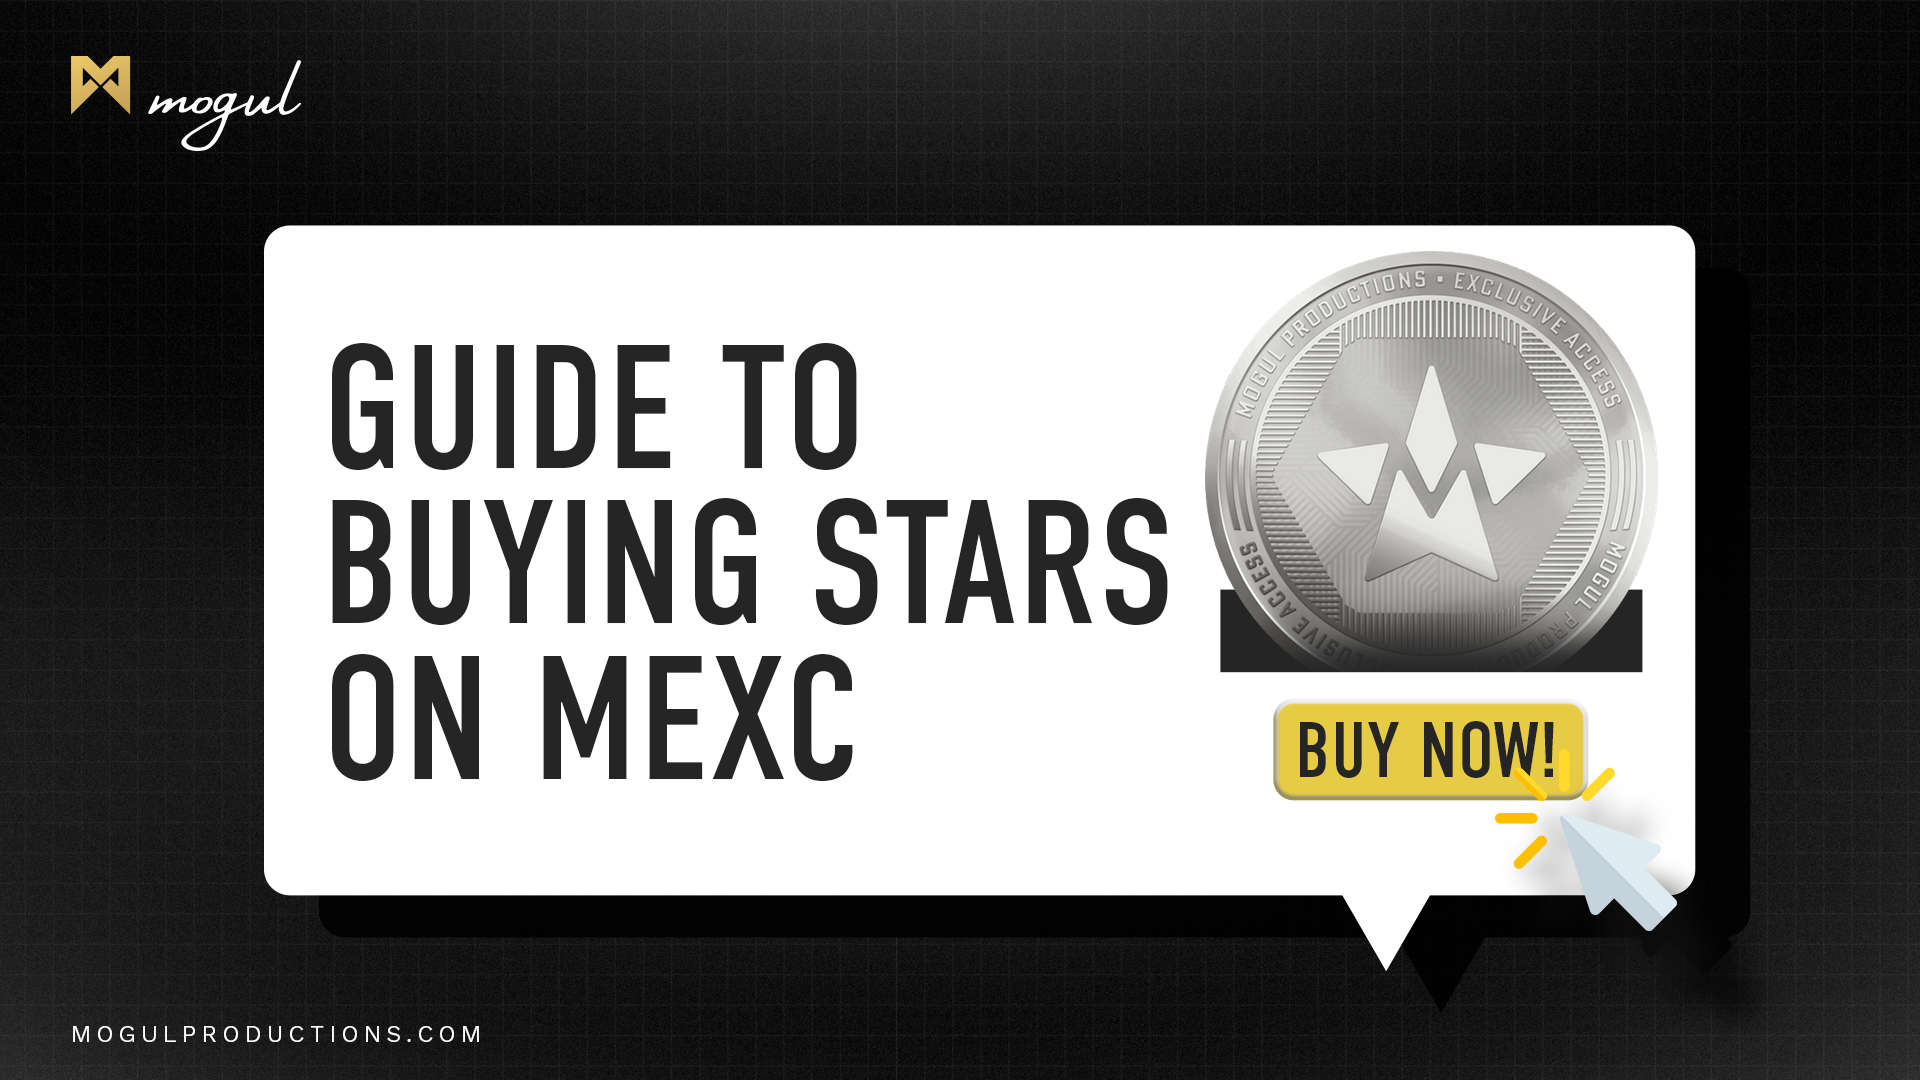 Mogul Productions - Guide to Buying Stars on MEXC